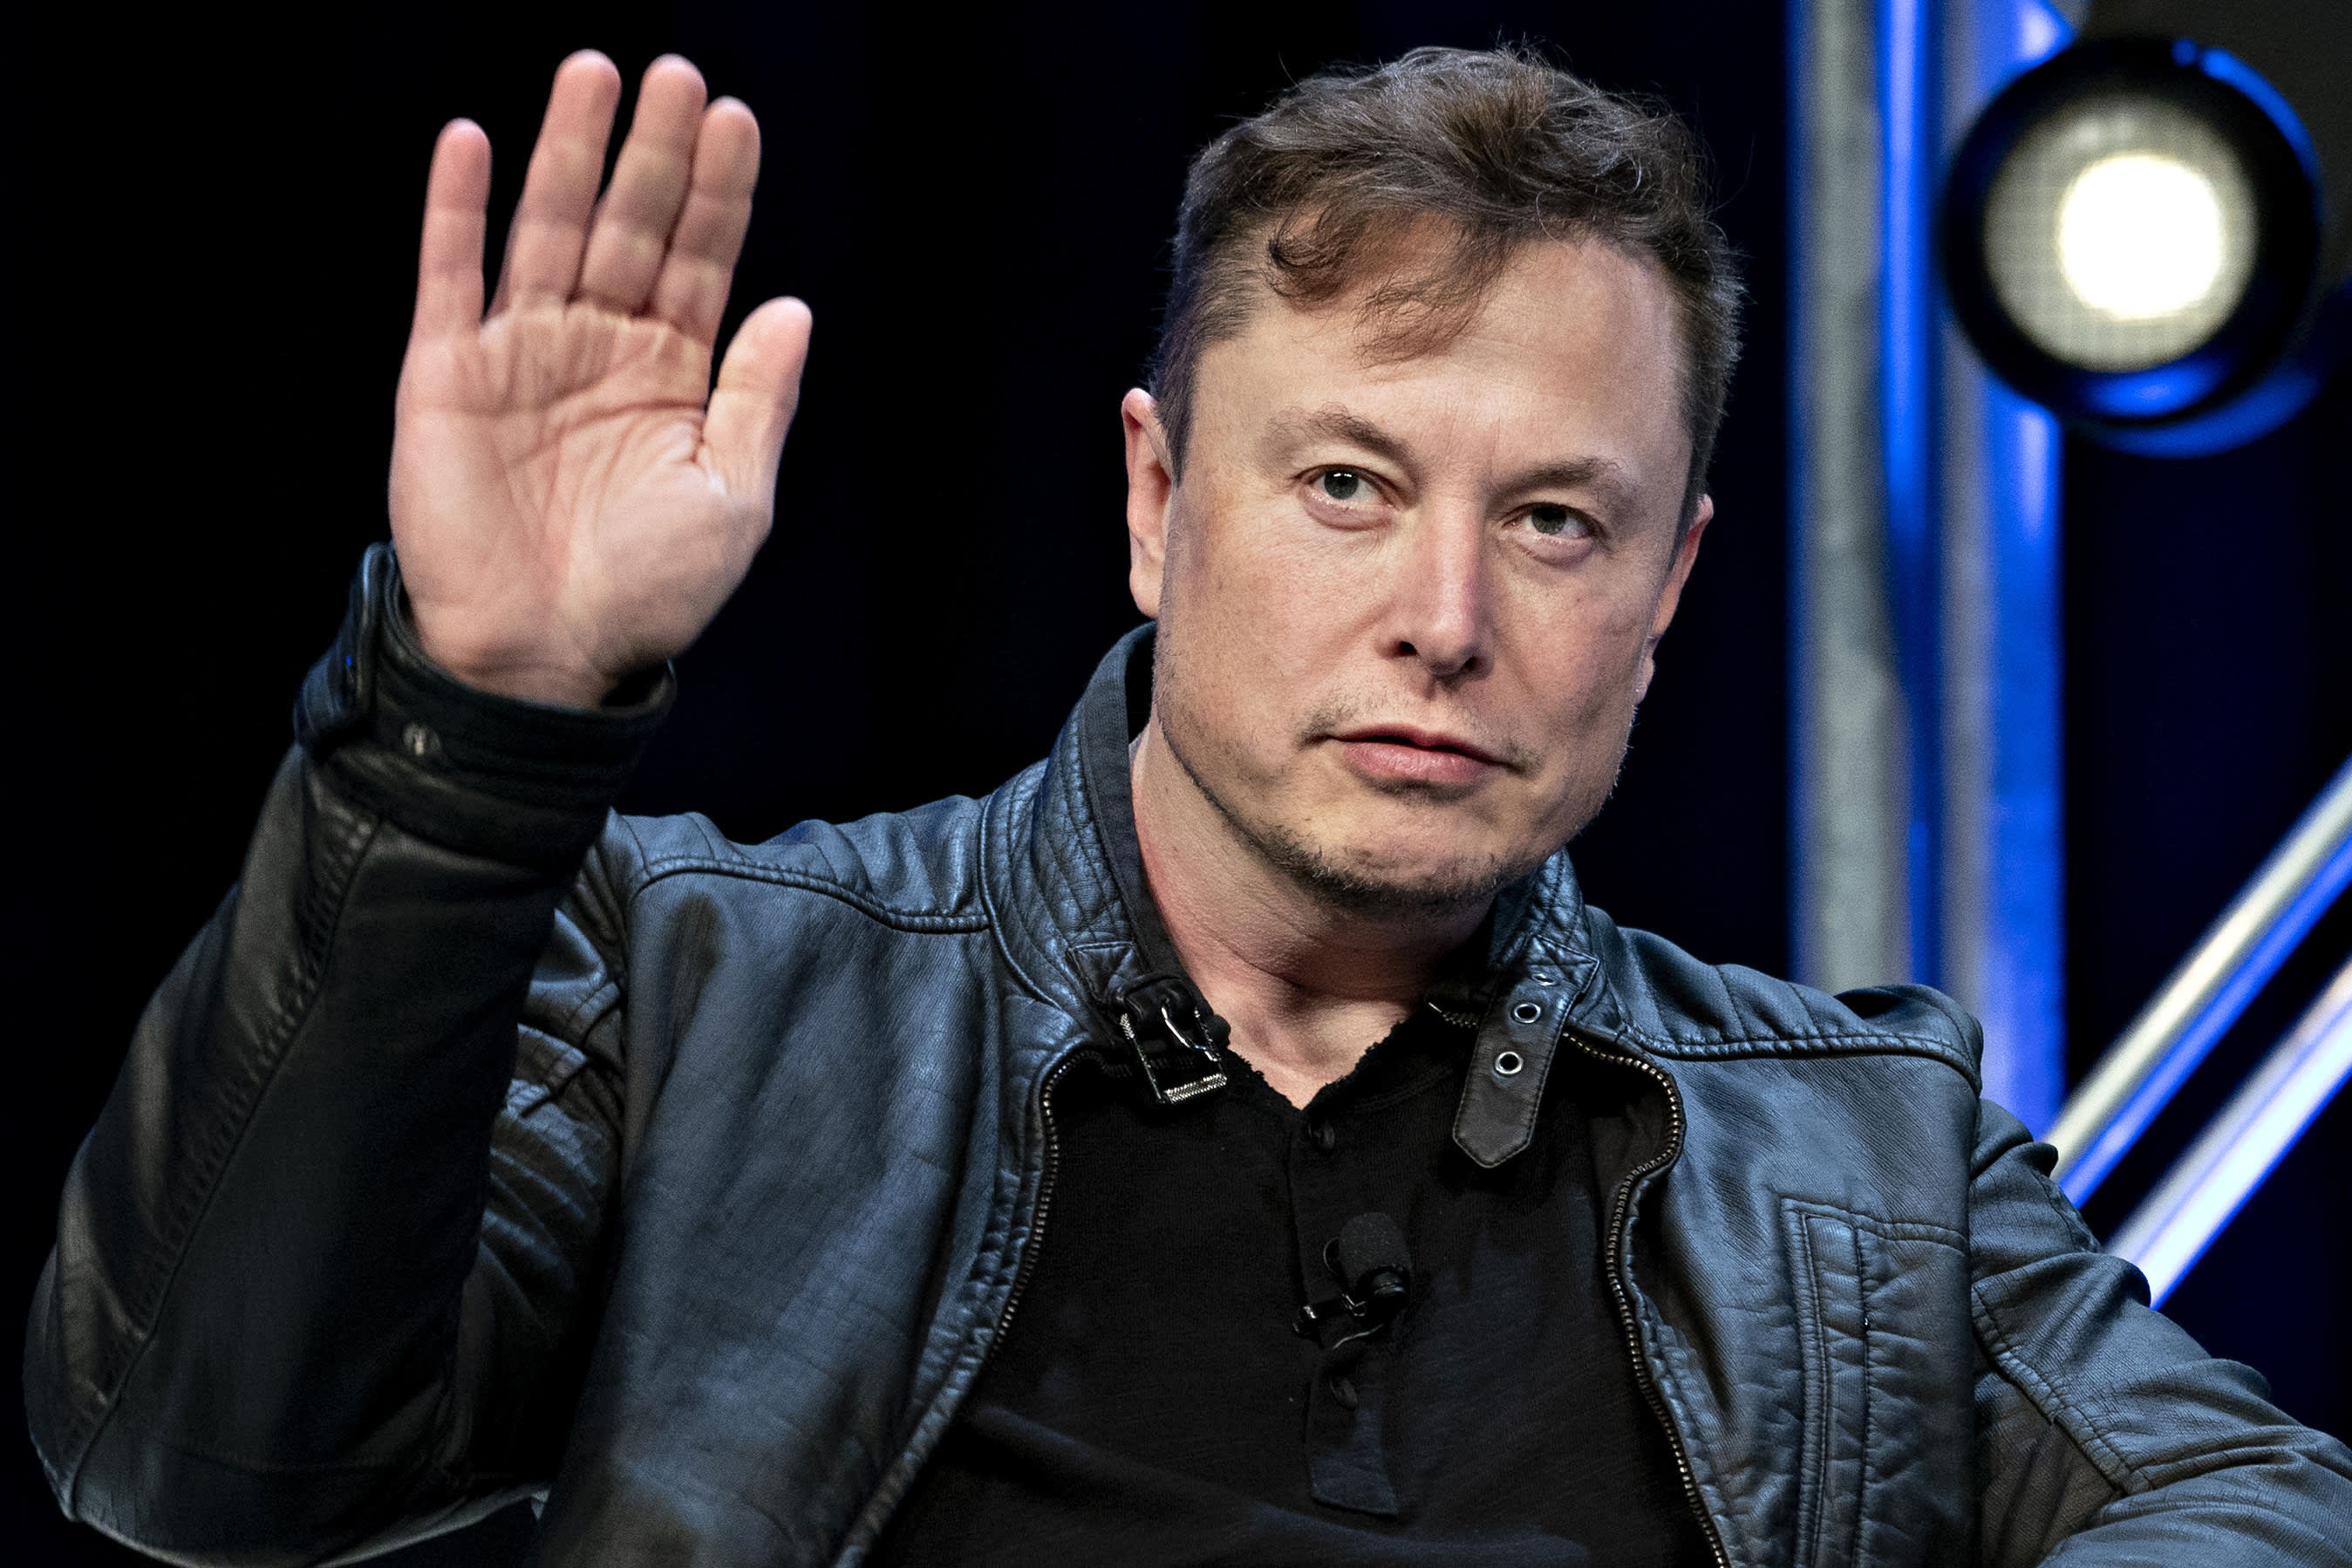 Tesla ordered by the NLRB that Elon Musk delete the anti-union tweet